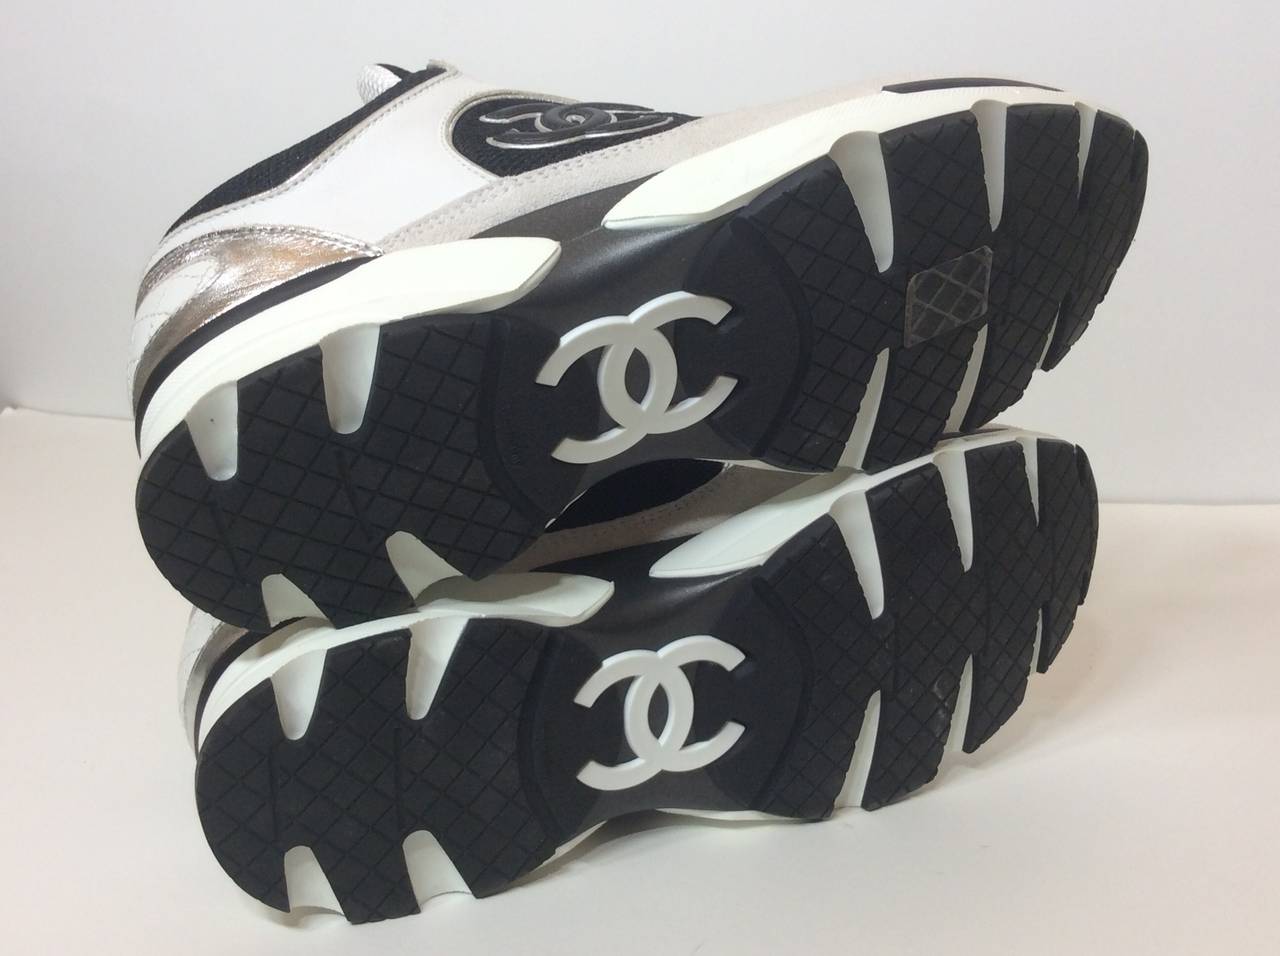 Chanel 2015 Sneakers Sold Out Worldwide 39 1/3 3